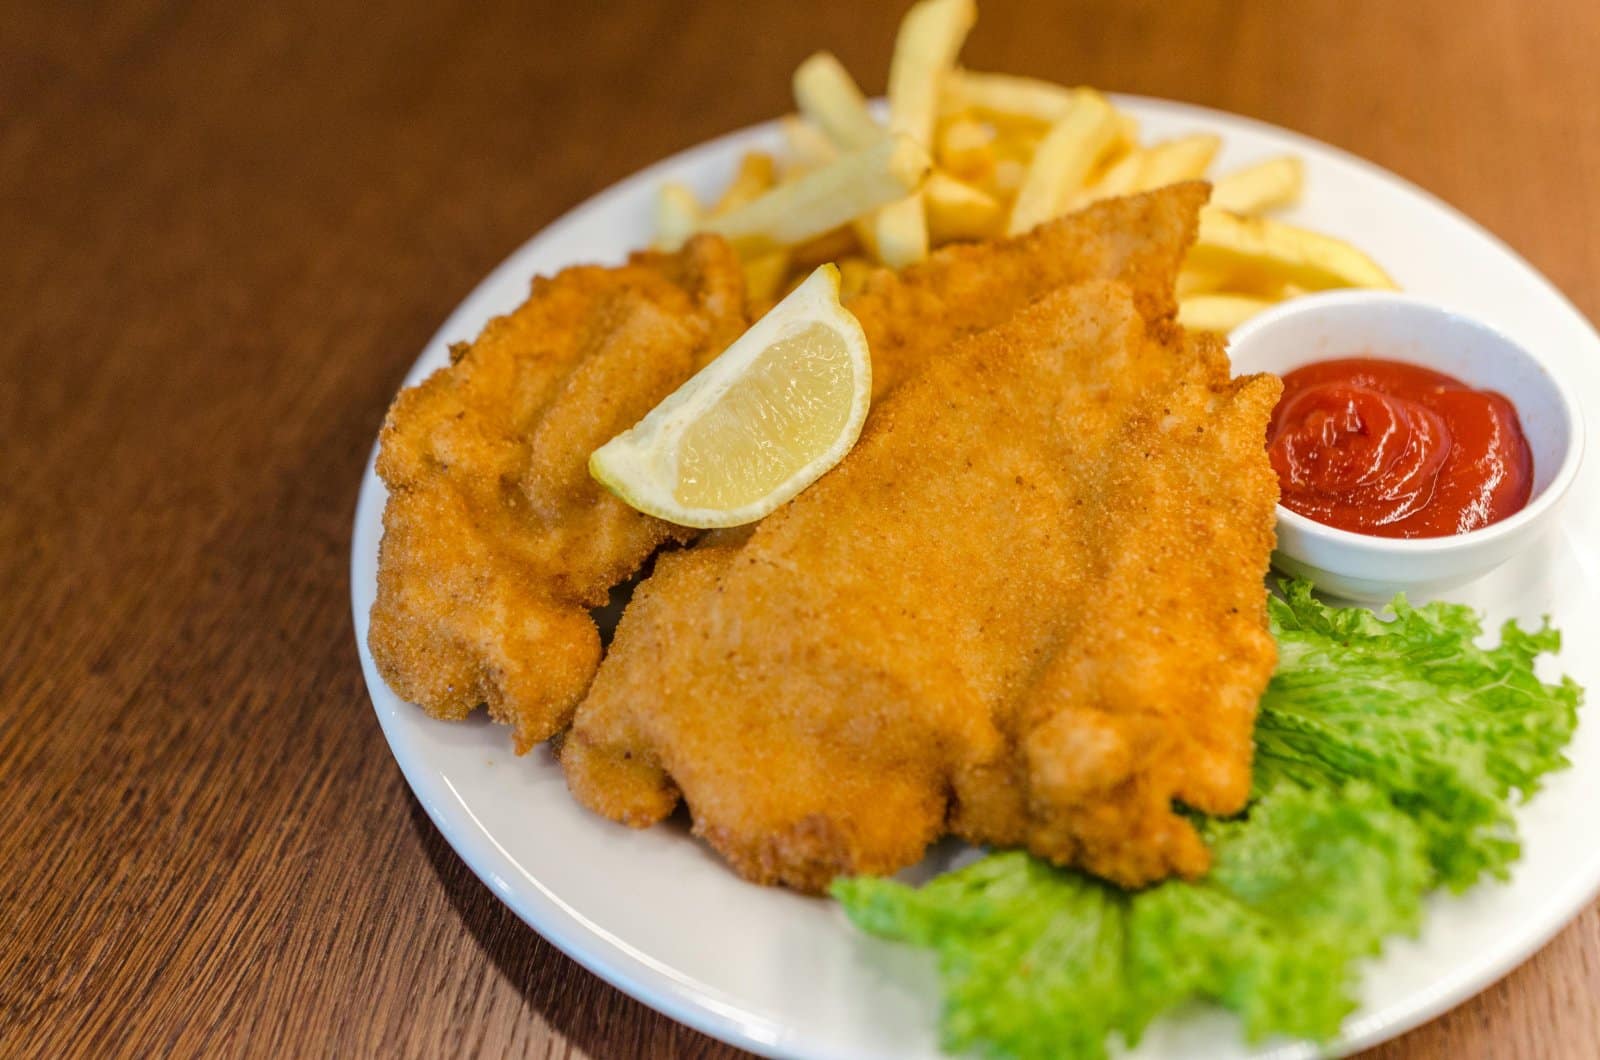 Image Credit: Pexels / Lukas <p><span>Thin, breaded, and pan-fried veal or pork cutlet, Schnitzel is a simple yet satisfying dish, best served with a lemon wedge and potato salad.</span></p>